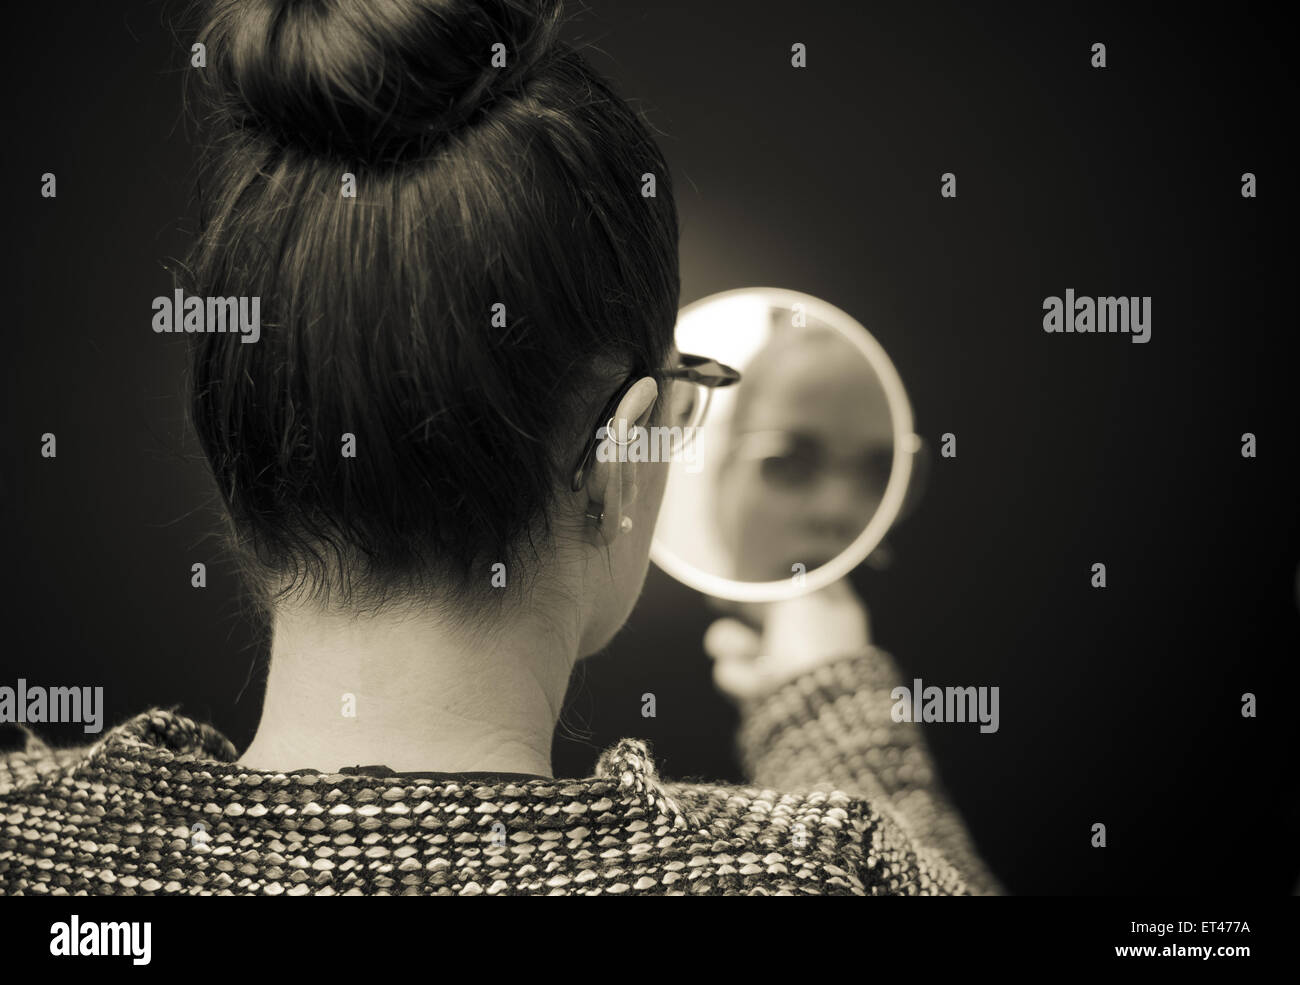 business woman looking at self reflection in mirror Stock Photo